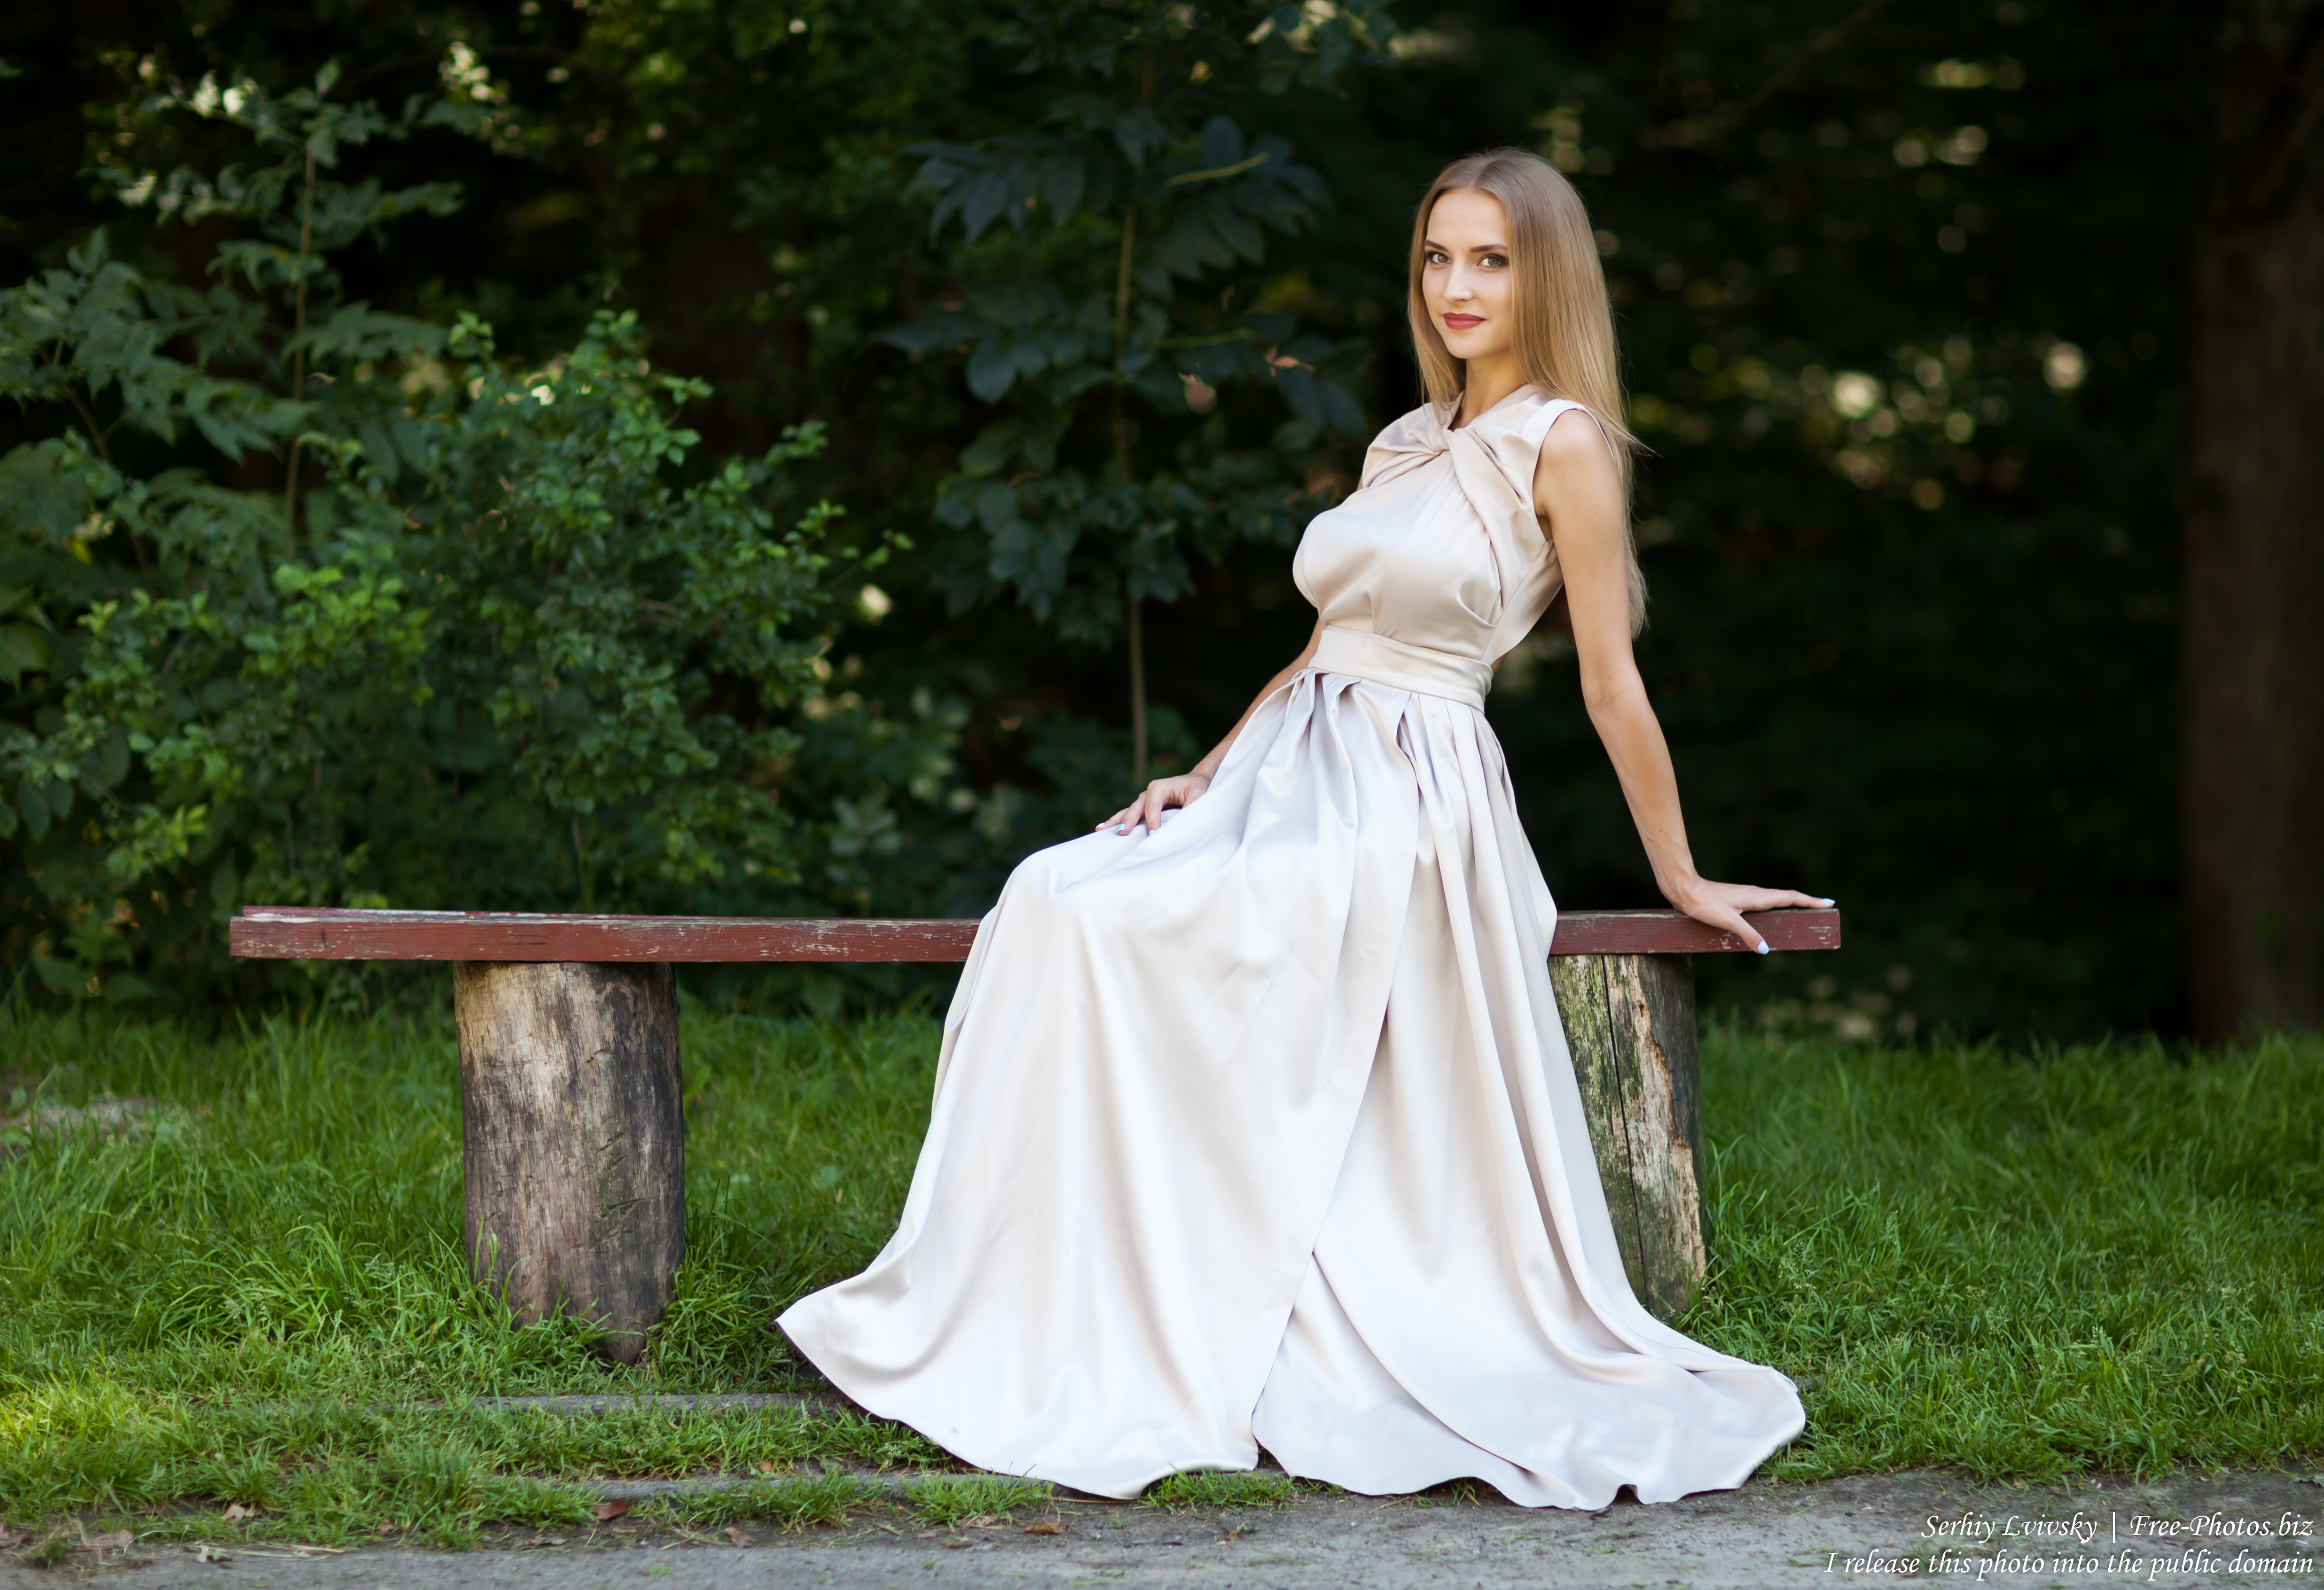 Marta - a 21-year-old natural blonde Catholic girl photographed by Serhiy Lvivsky in August 2017, picture 32